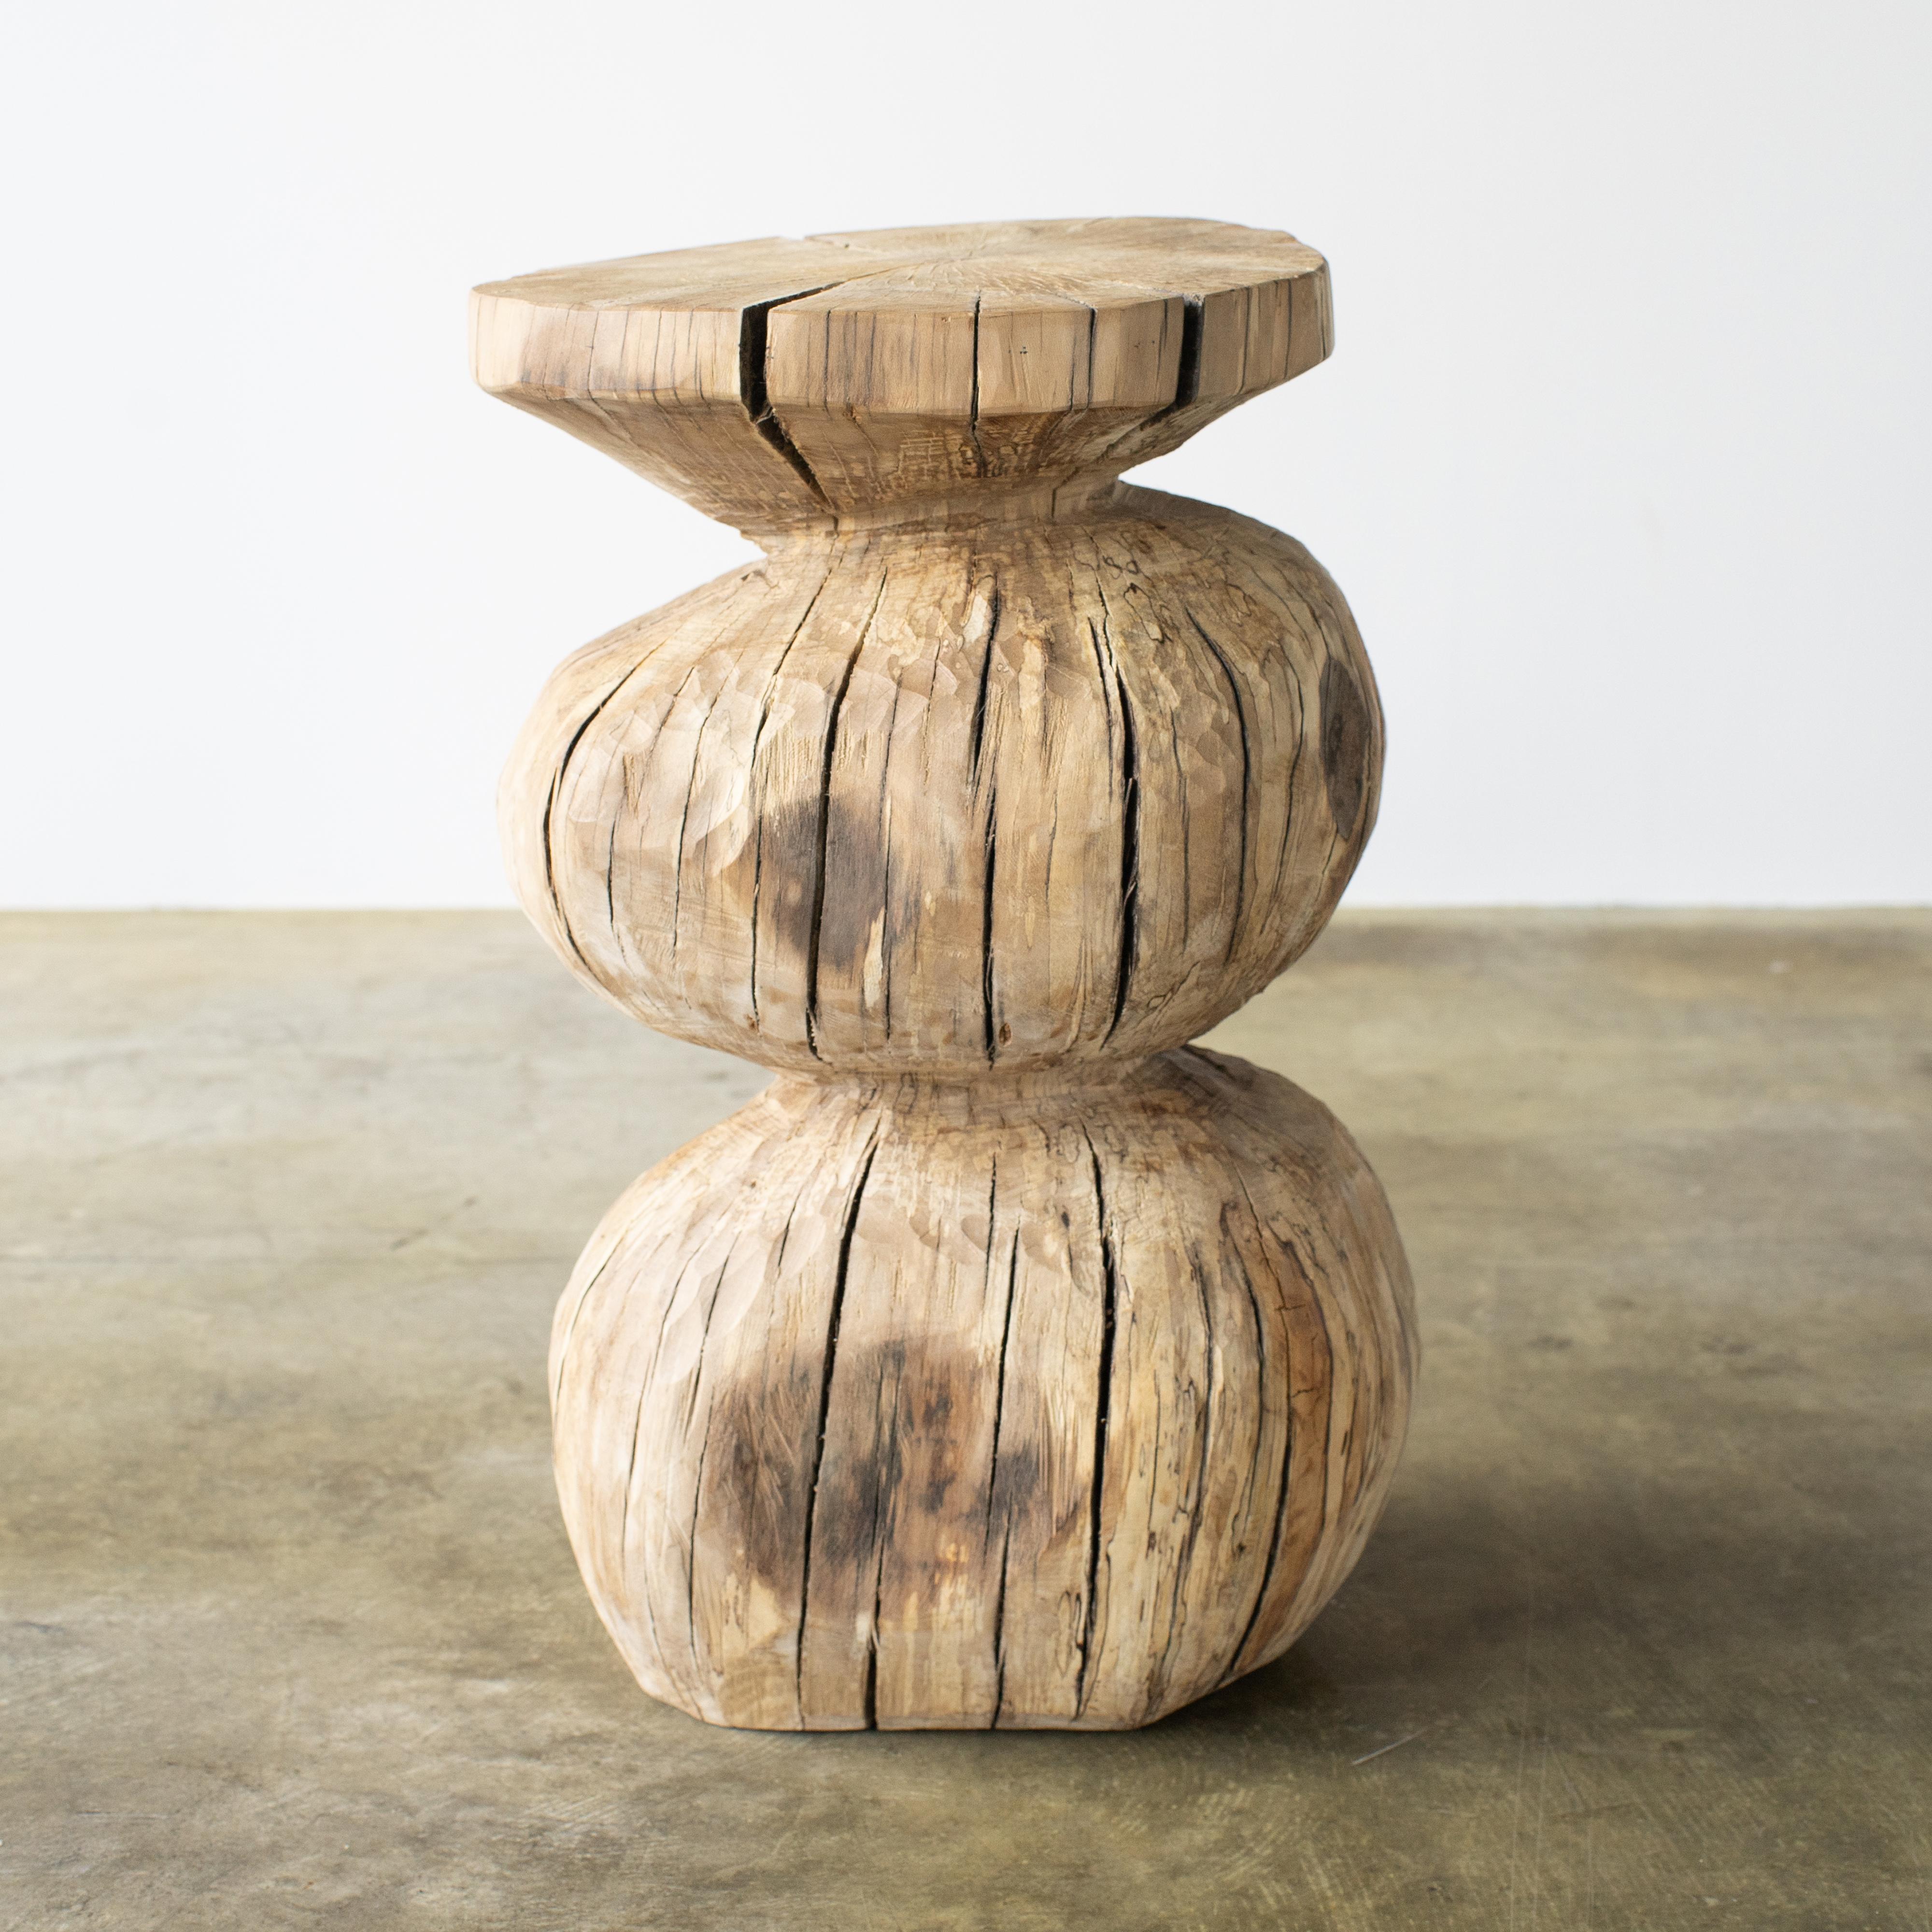 Name: Mamma
Sculptural stool by Hiroyuki Nishimura and zone carved furniture
Material: pasania
This work is carved from log with some kinds of chainsaws.
Most of wood used for Nishimura's works are unable to use anything, these woods are